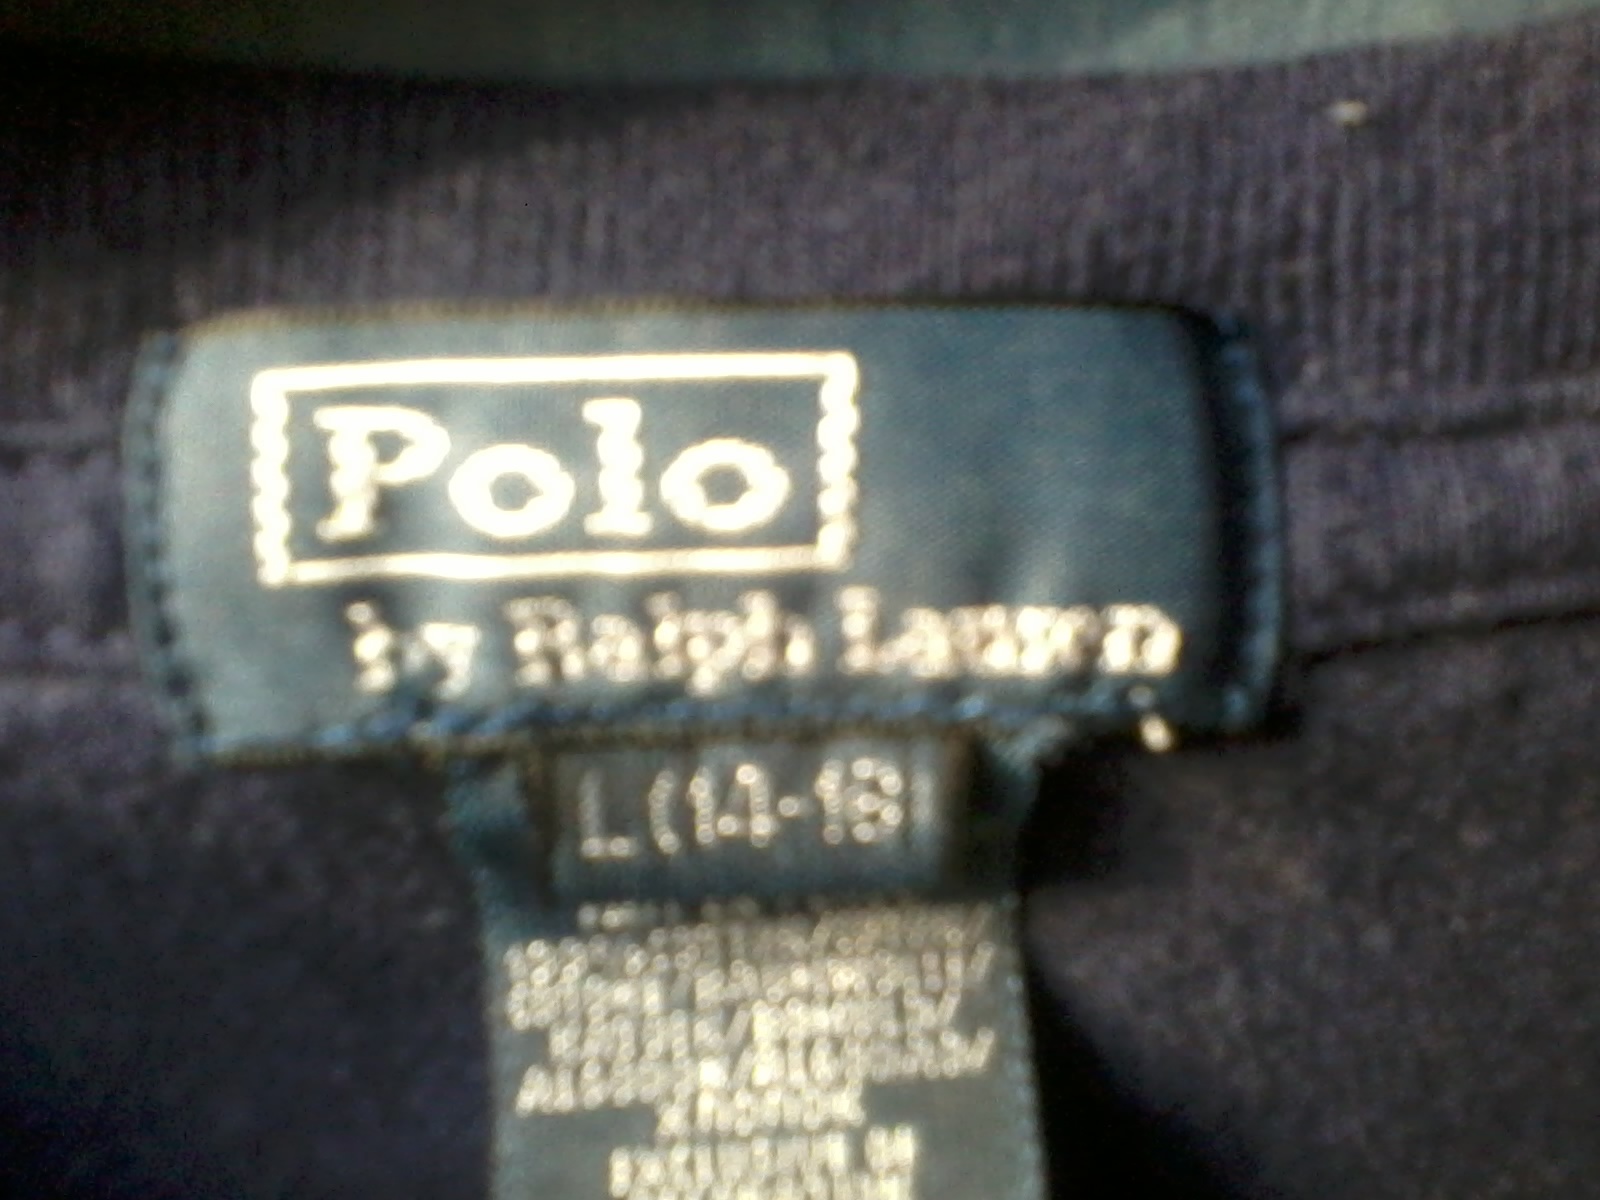 Found today in a second-hand shop, decided to buy - My, Polo, , Ralph lauren